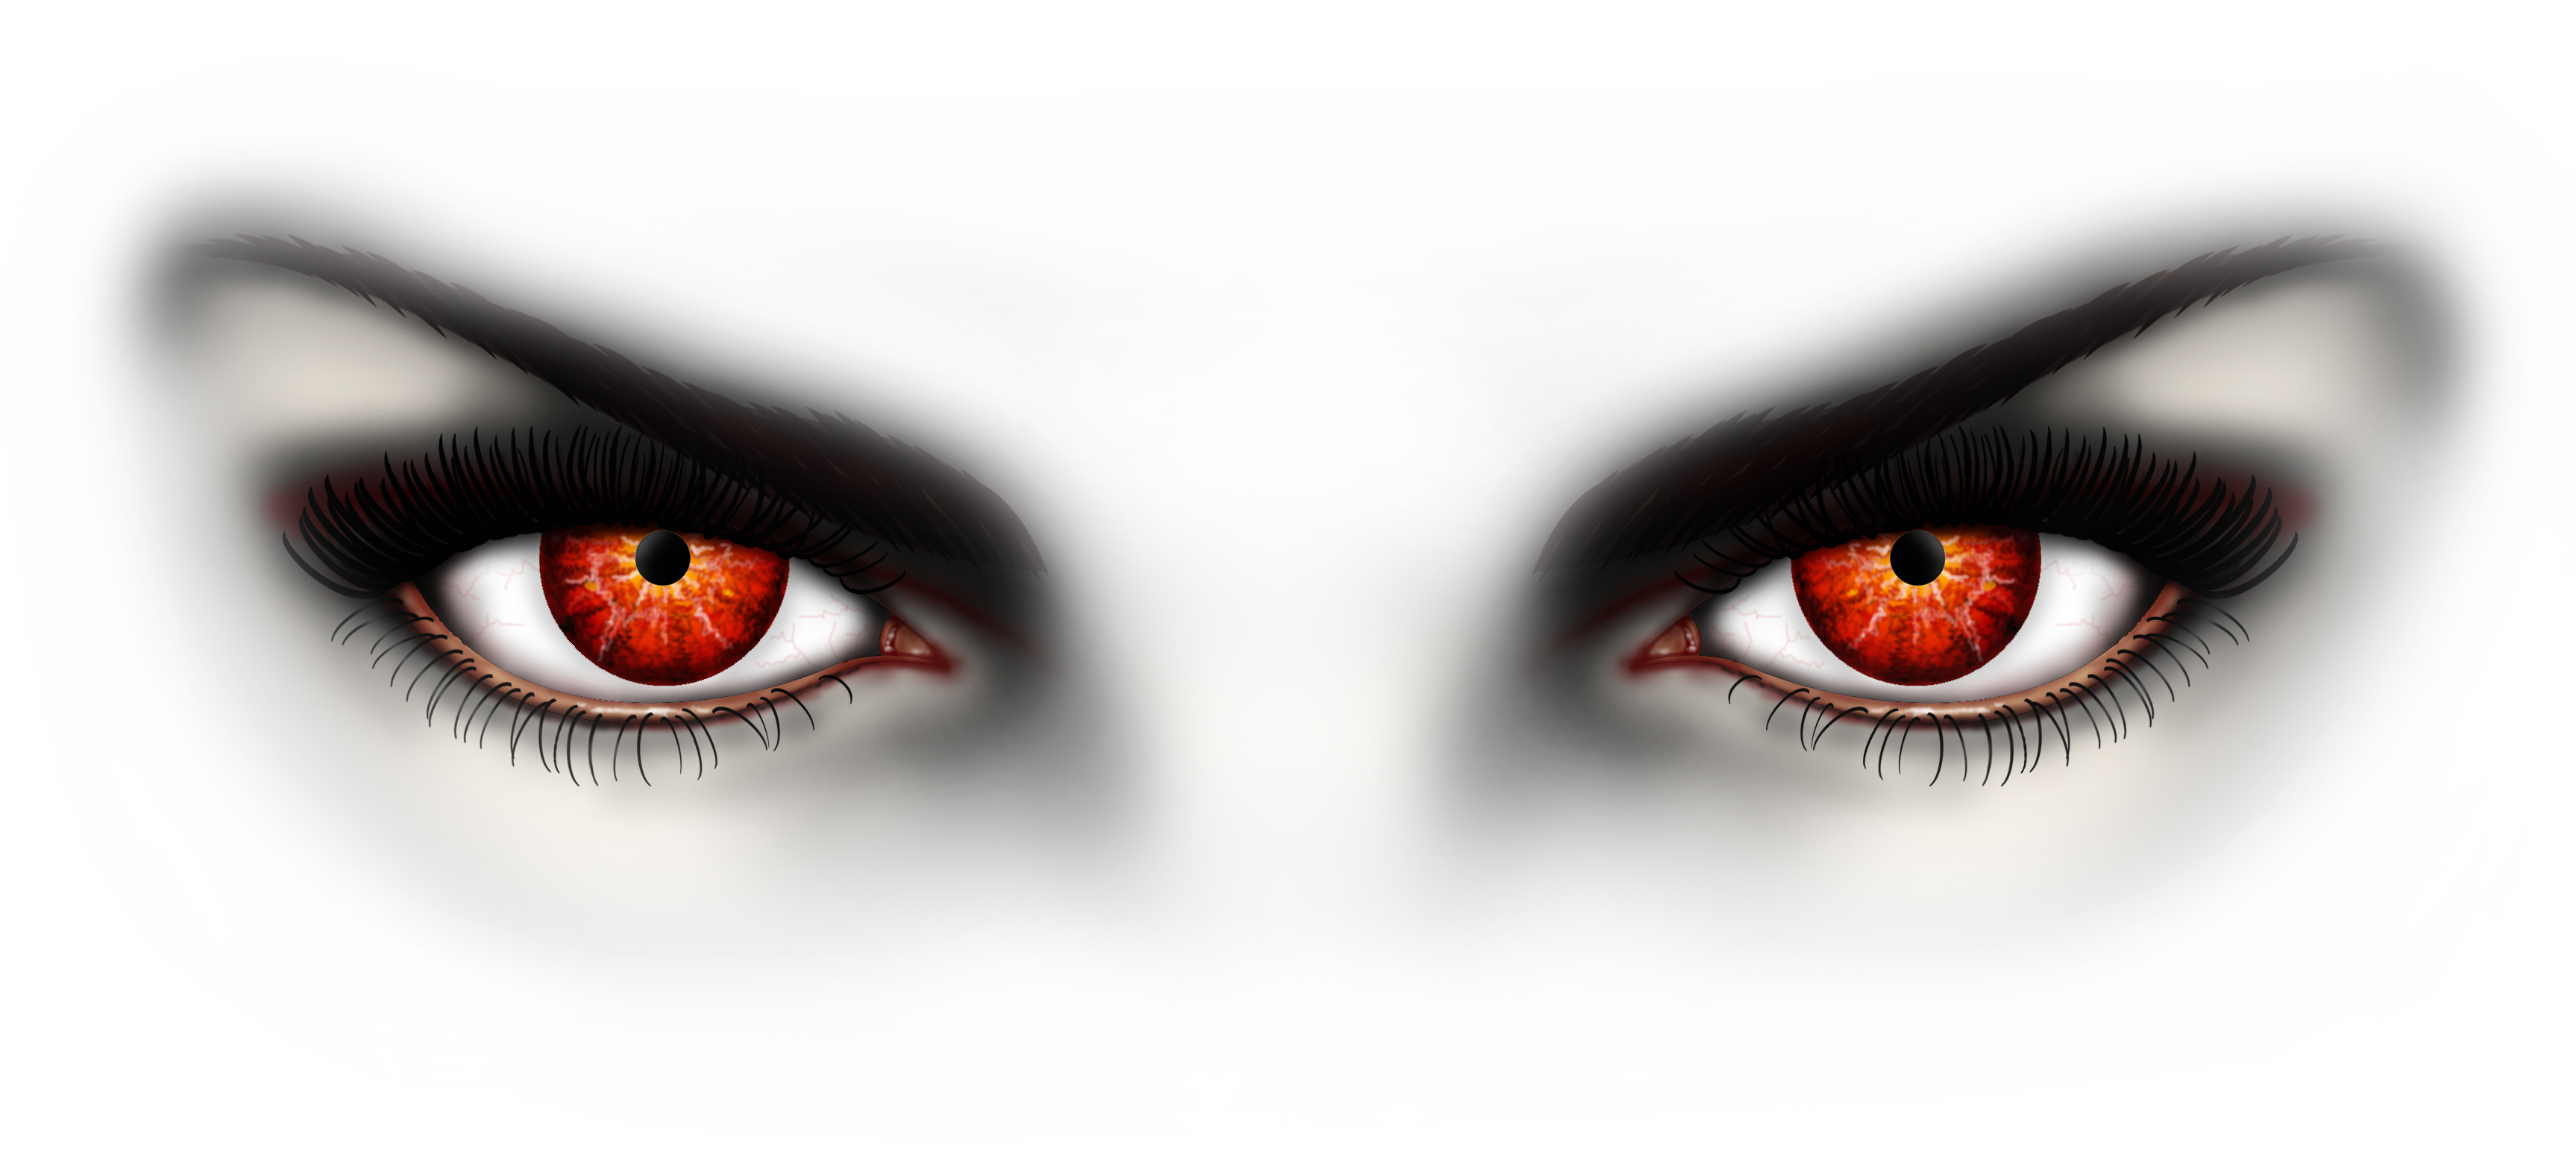 3454x1548 One Of My Favorite Drawings Ever Inspired - Red Eye Drawing. 